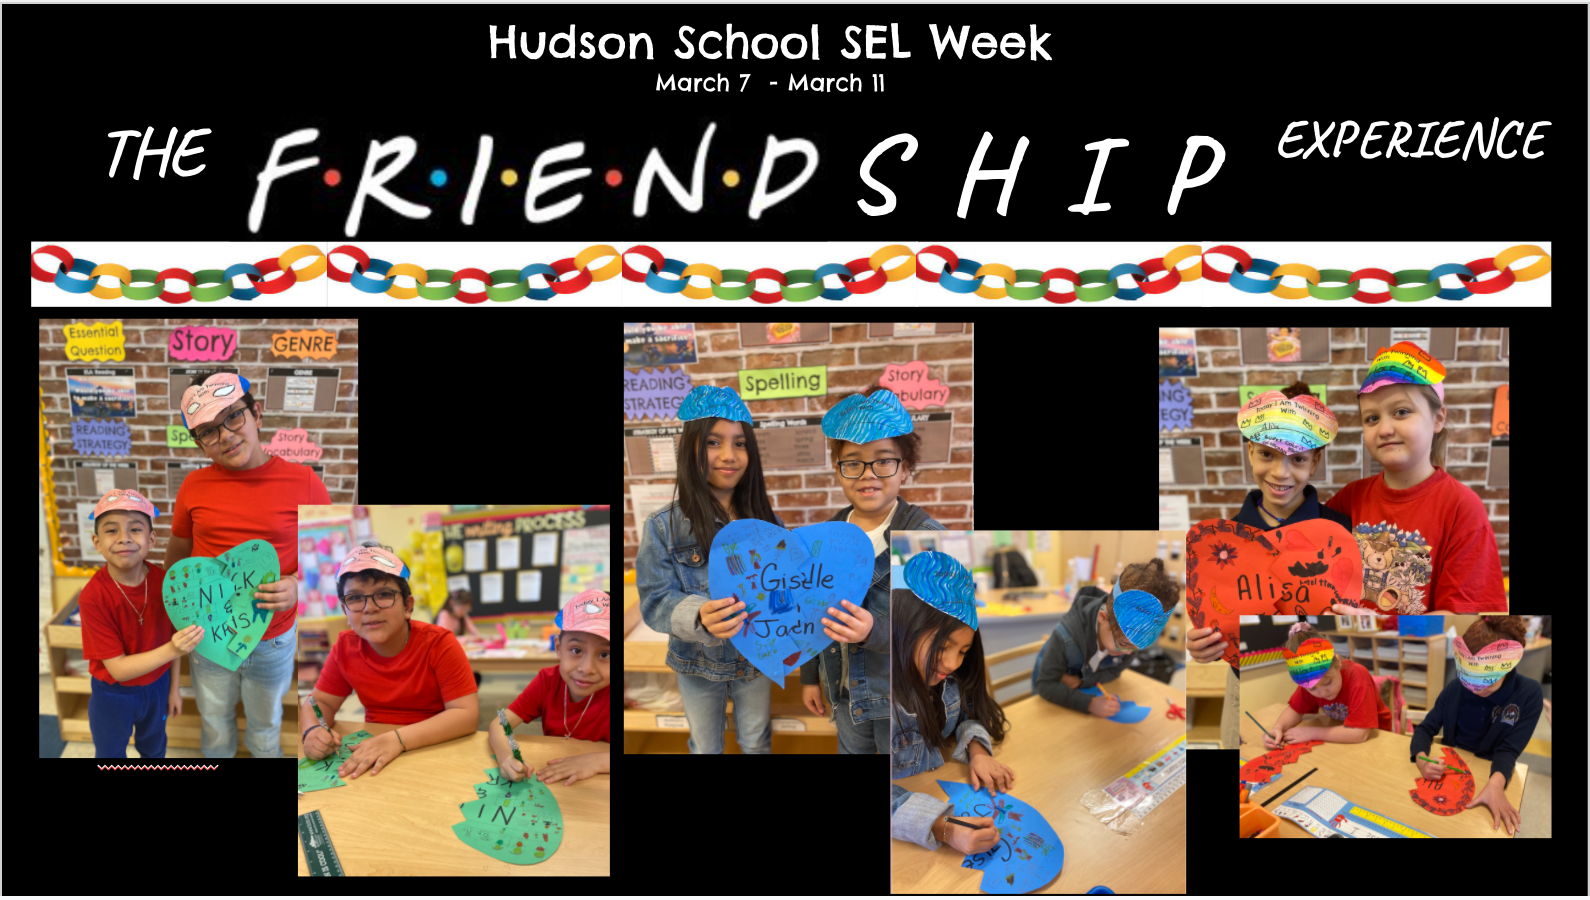 More of the FRIENDSHIP Experience at Hudson School